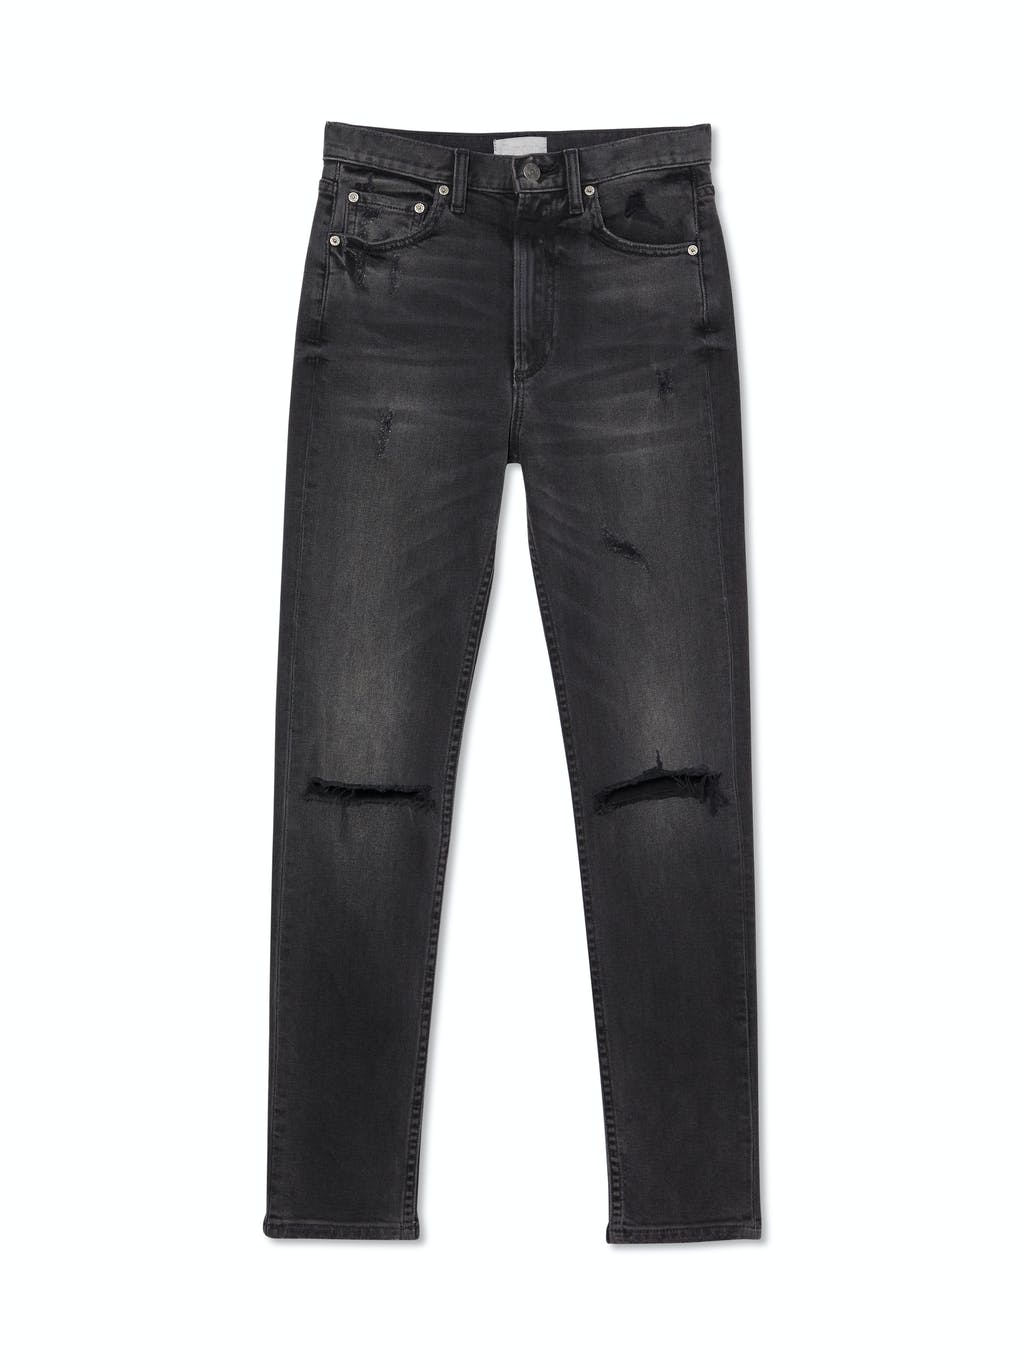 The Zachary High Rise Comfort Stretch Skinny Jeans